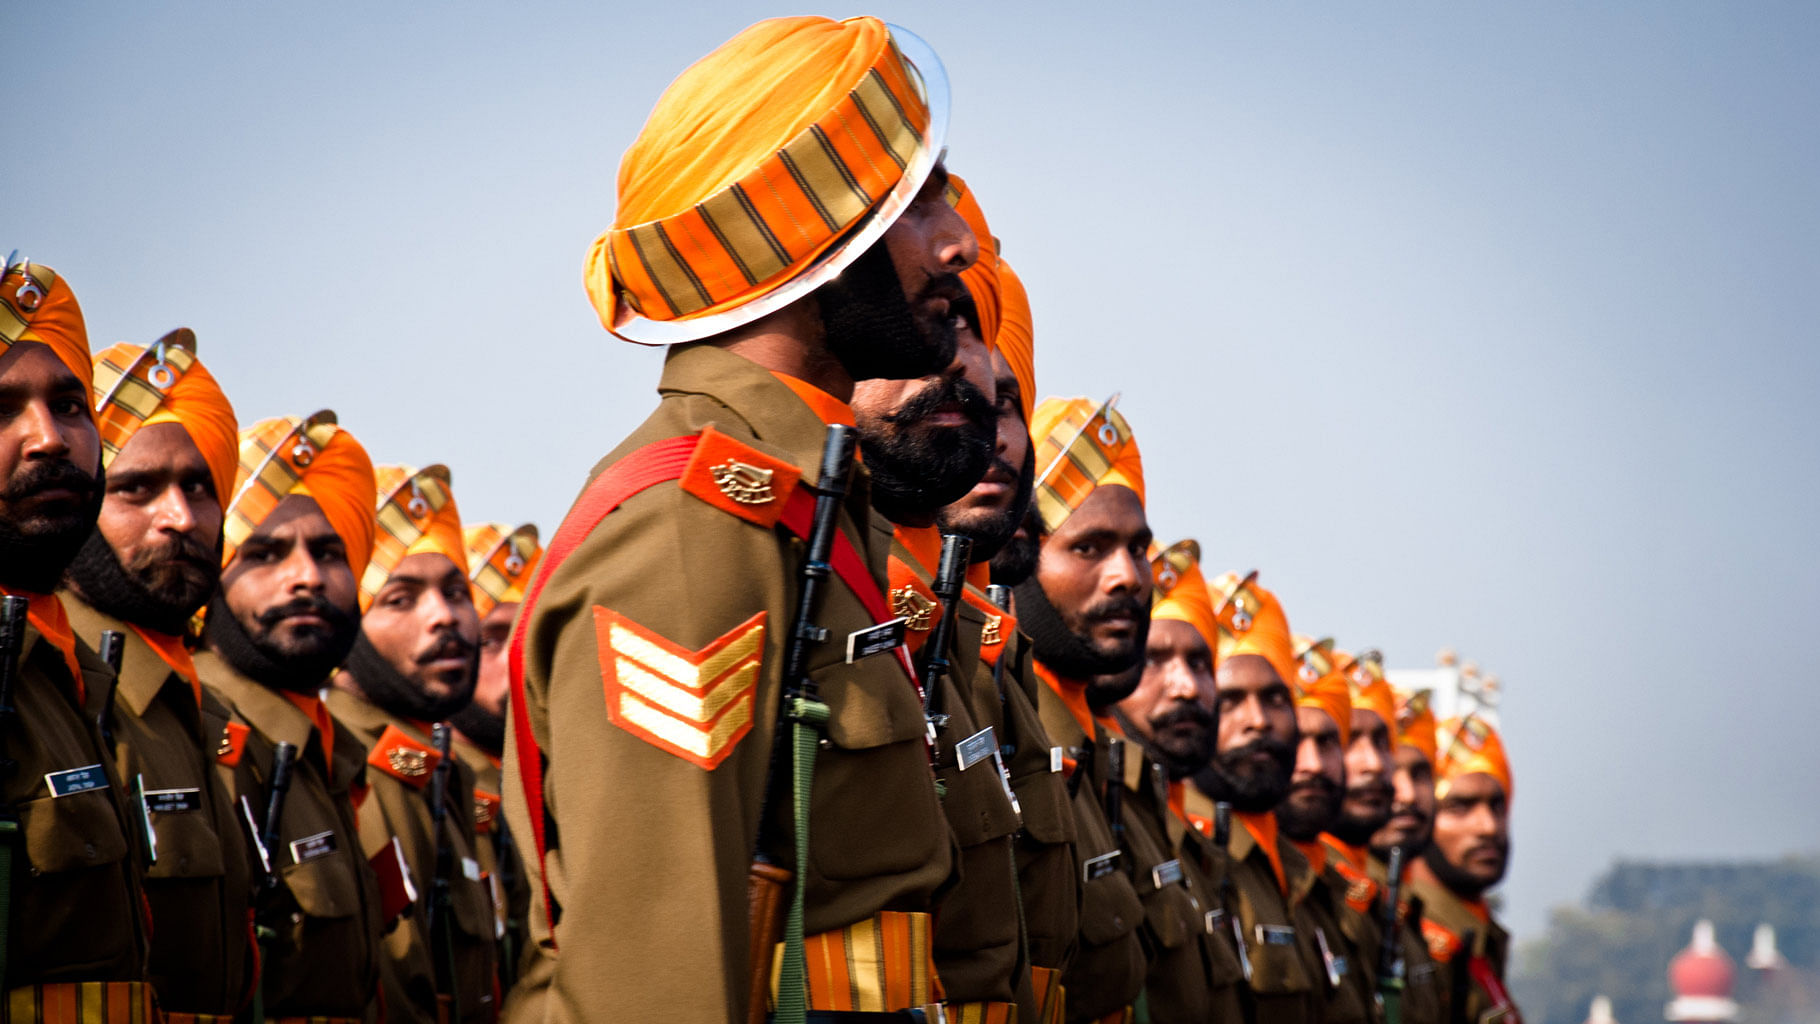 The Sikh Light Infantry’s marching contingent. (Photo: <a href="https://www.flickr.com/photos/jzsinr/5356170563/in/photostream">Jaskirat Singh Bawa</a>)